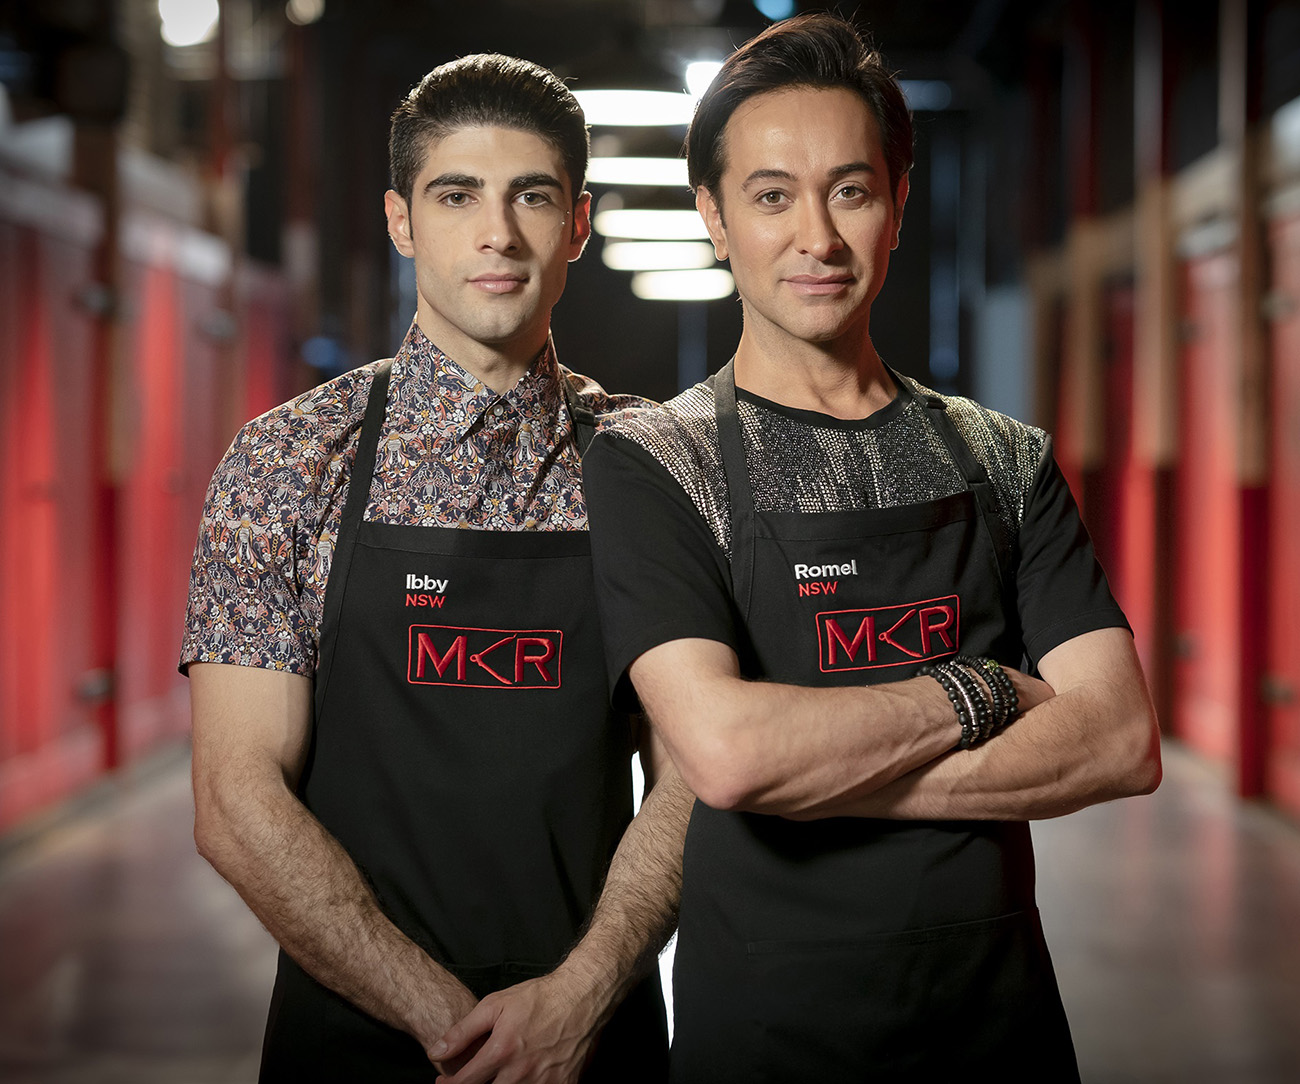 MKR My Kitchen Rules Ibby and Romel runner up